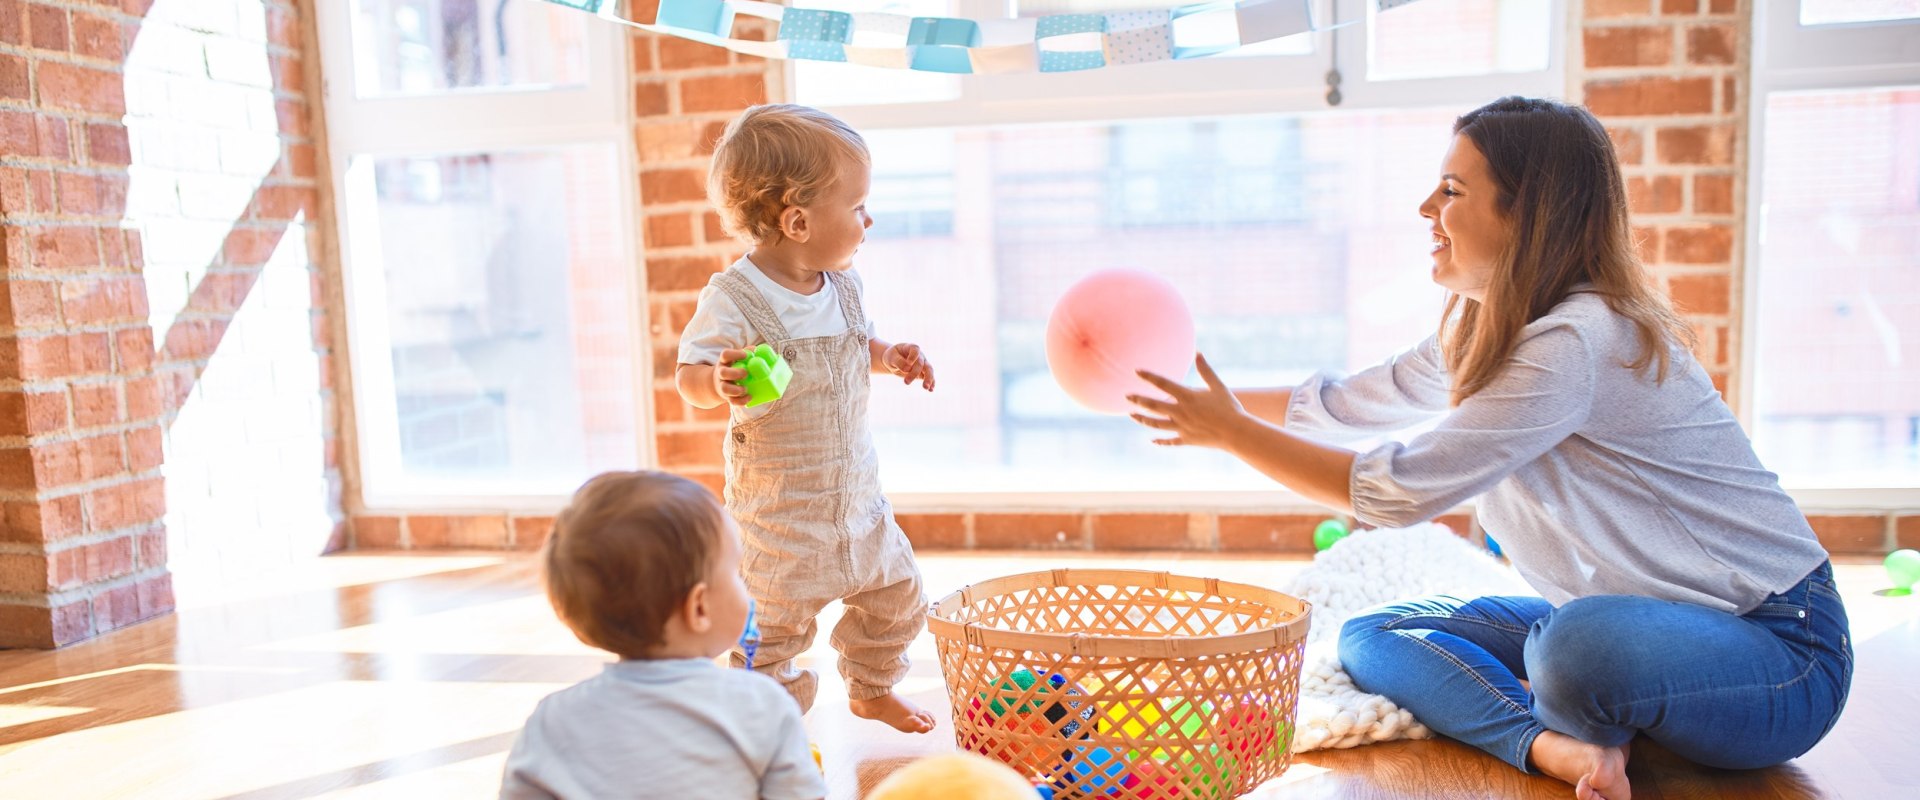 Speech Therapy Games for Preschoolers: Fun Activities to Do at Home